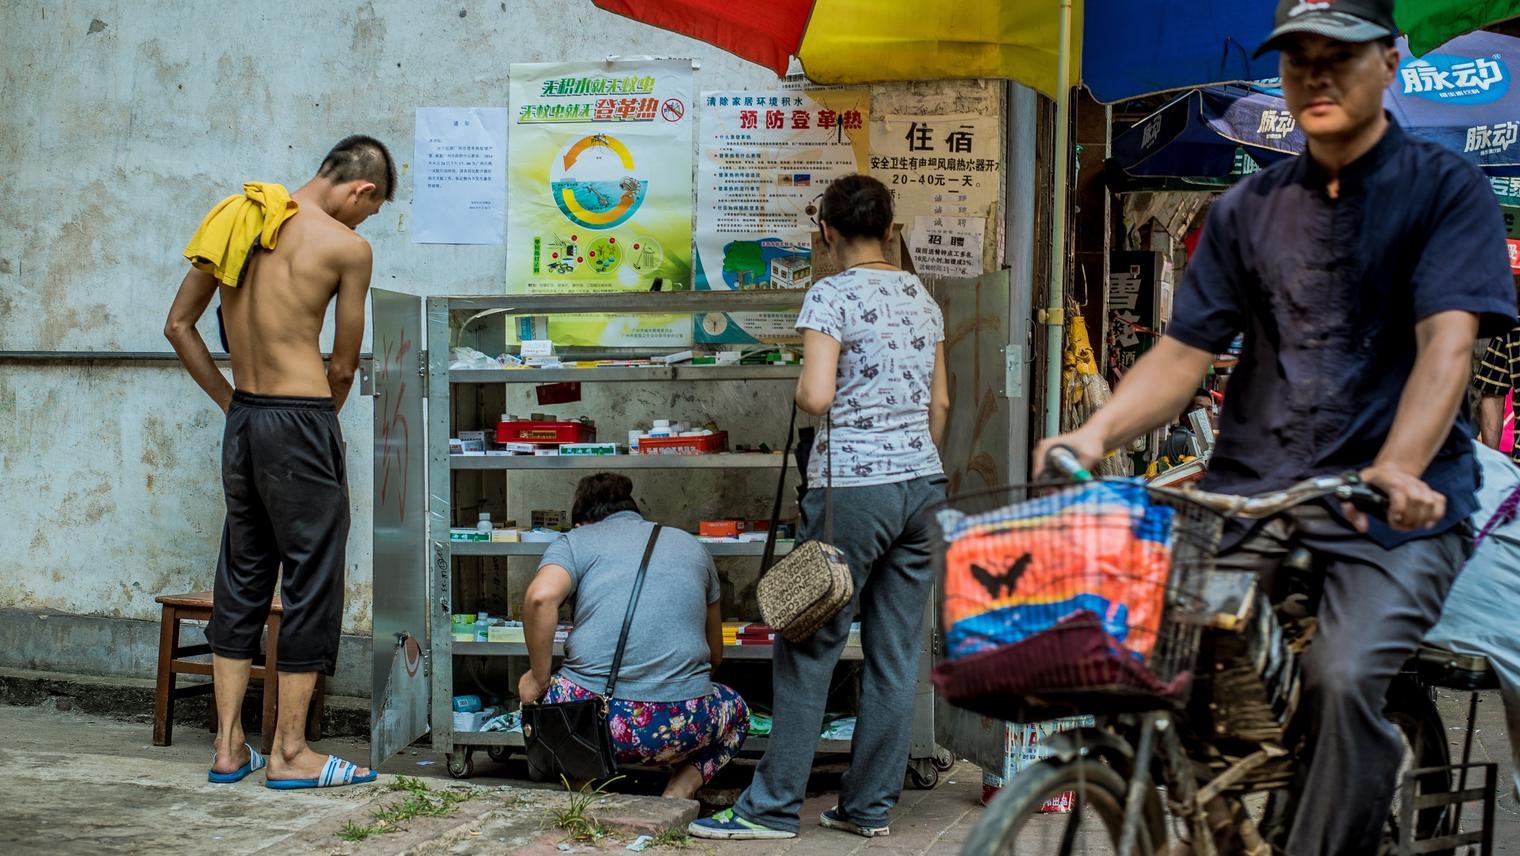  How powerful is the transformation of "room tickets" in Guangzhou's urban villages?